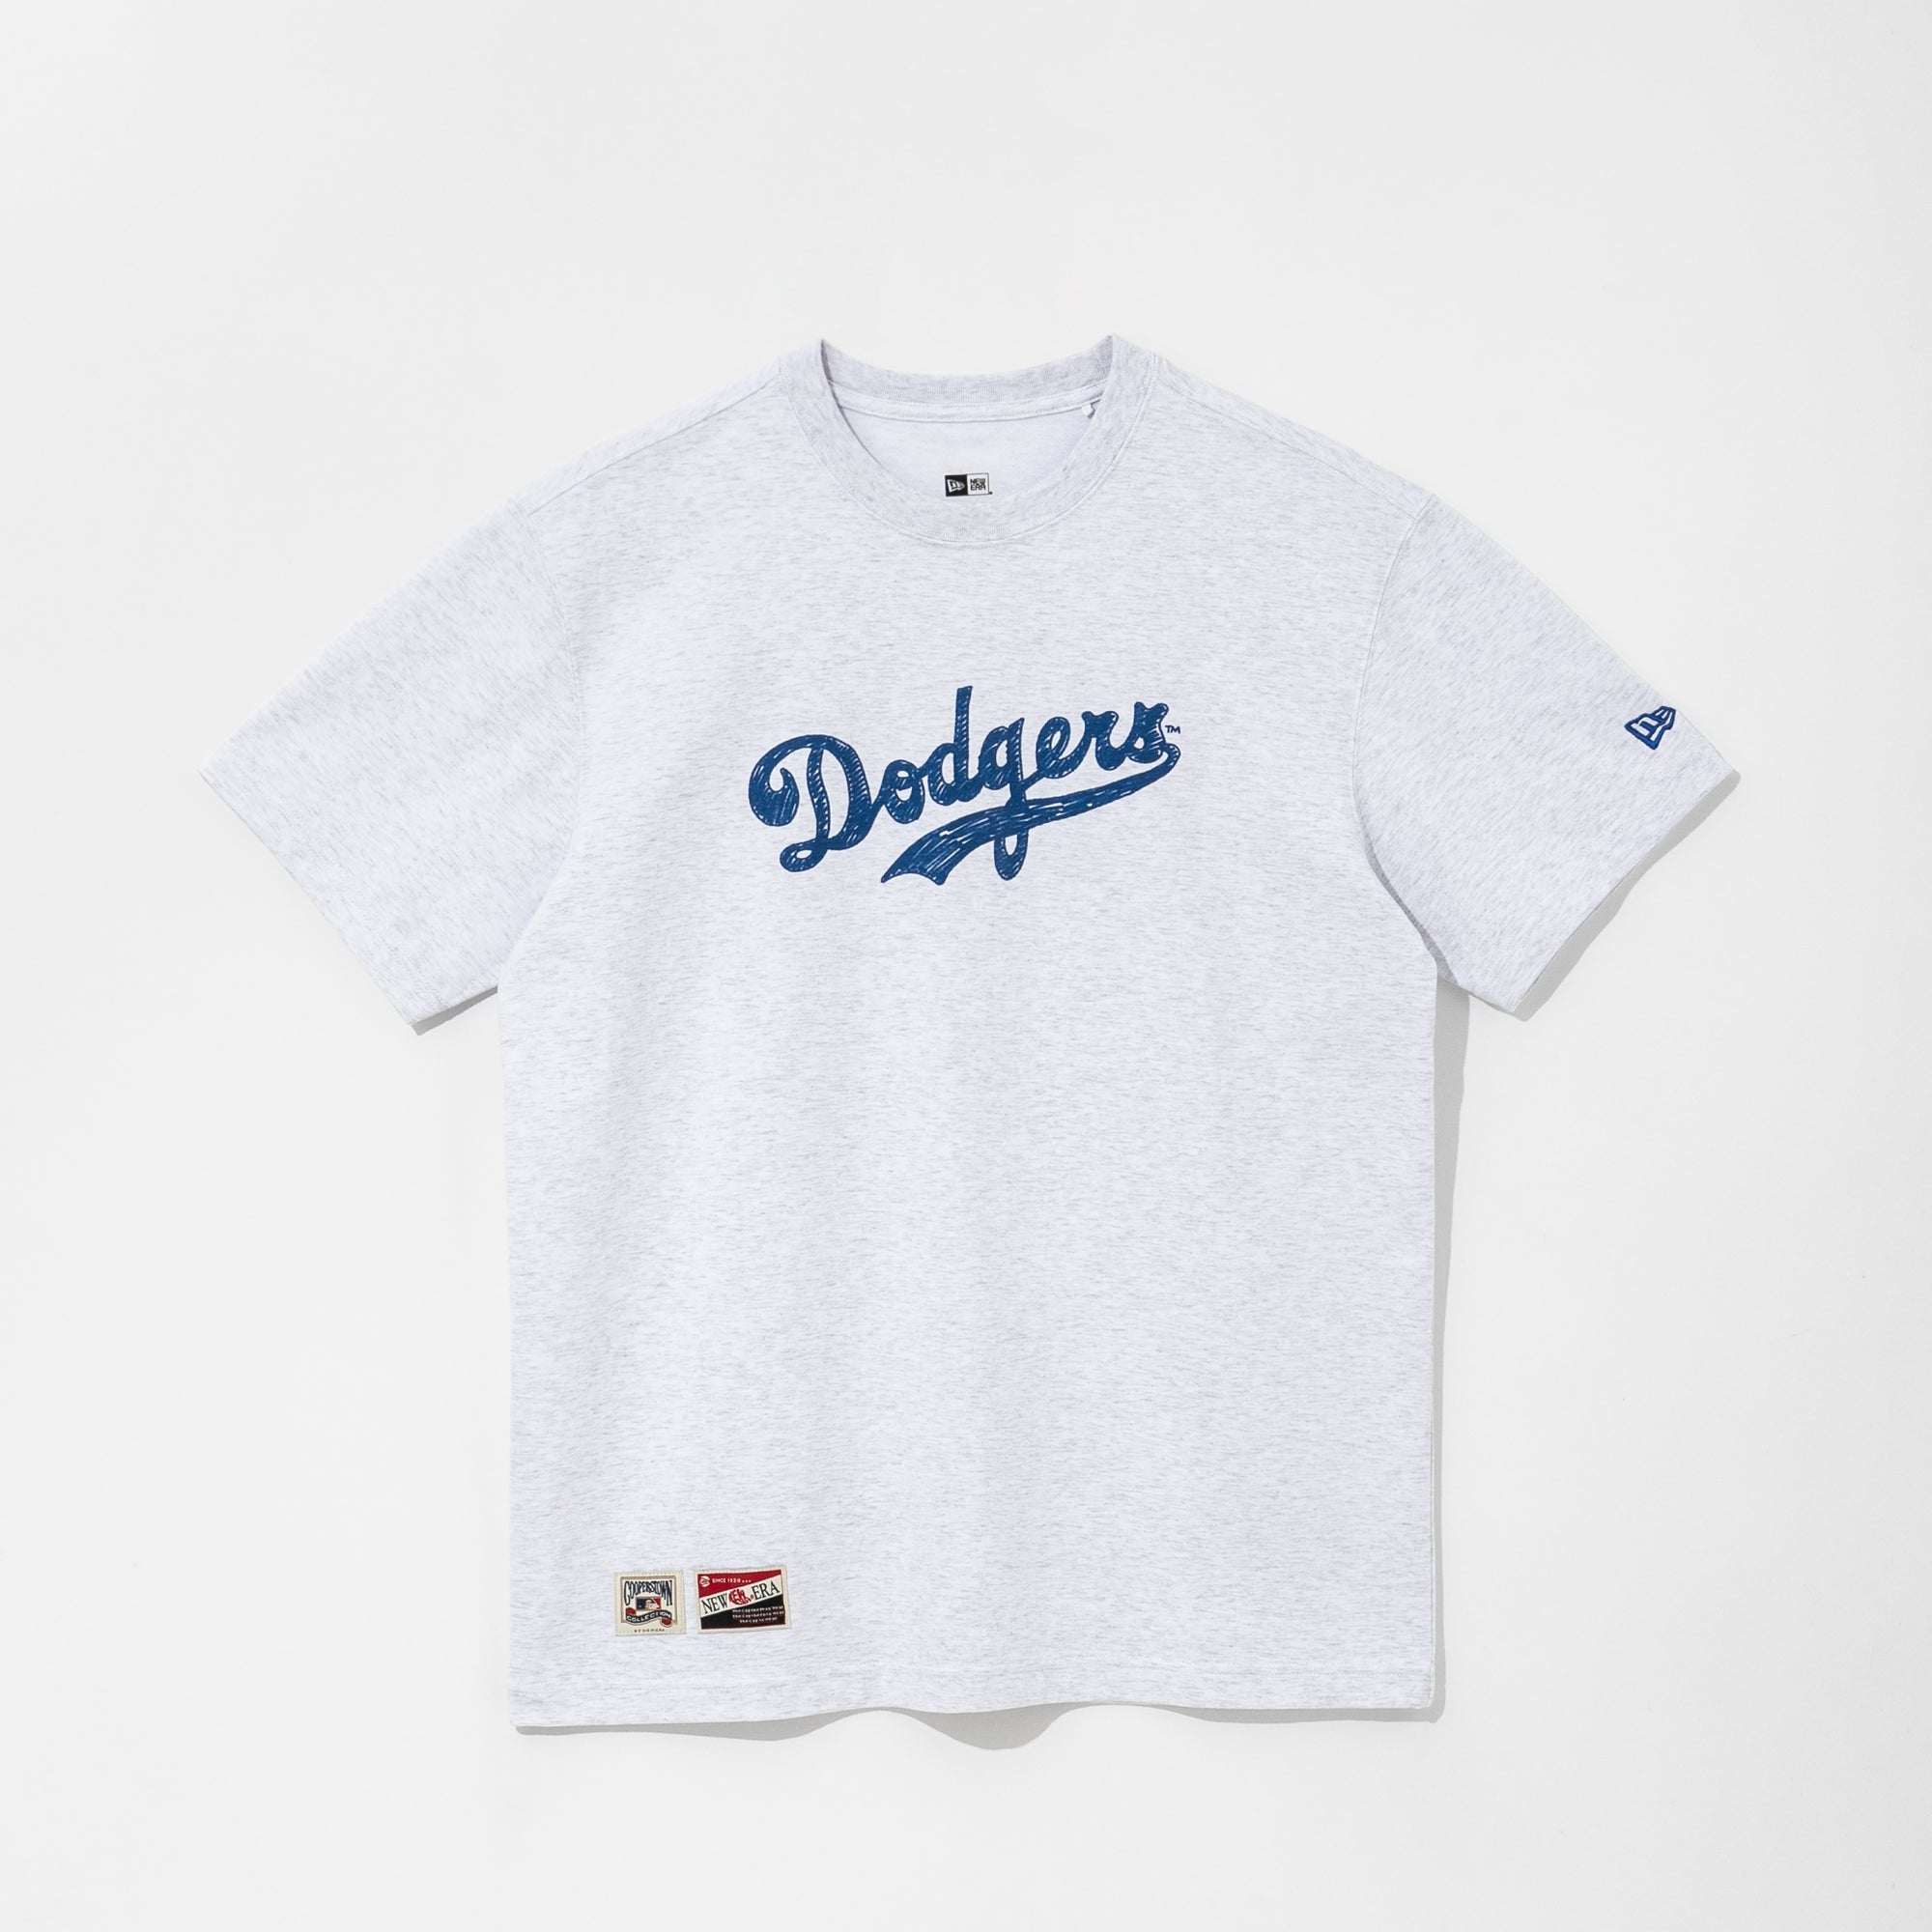 KOREAN LIFESTYLE BRAND MLB OPENS FIRST FLAGSHIP STORE AT MANDARIN GALLERY  WITH COMPLIMENTARY CUSTOMISATION SERVICES  GIFT BAGS  Shout